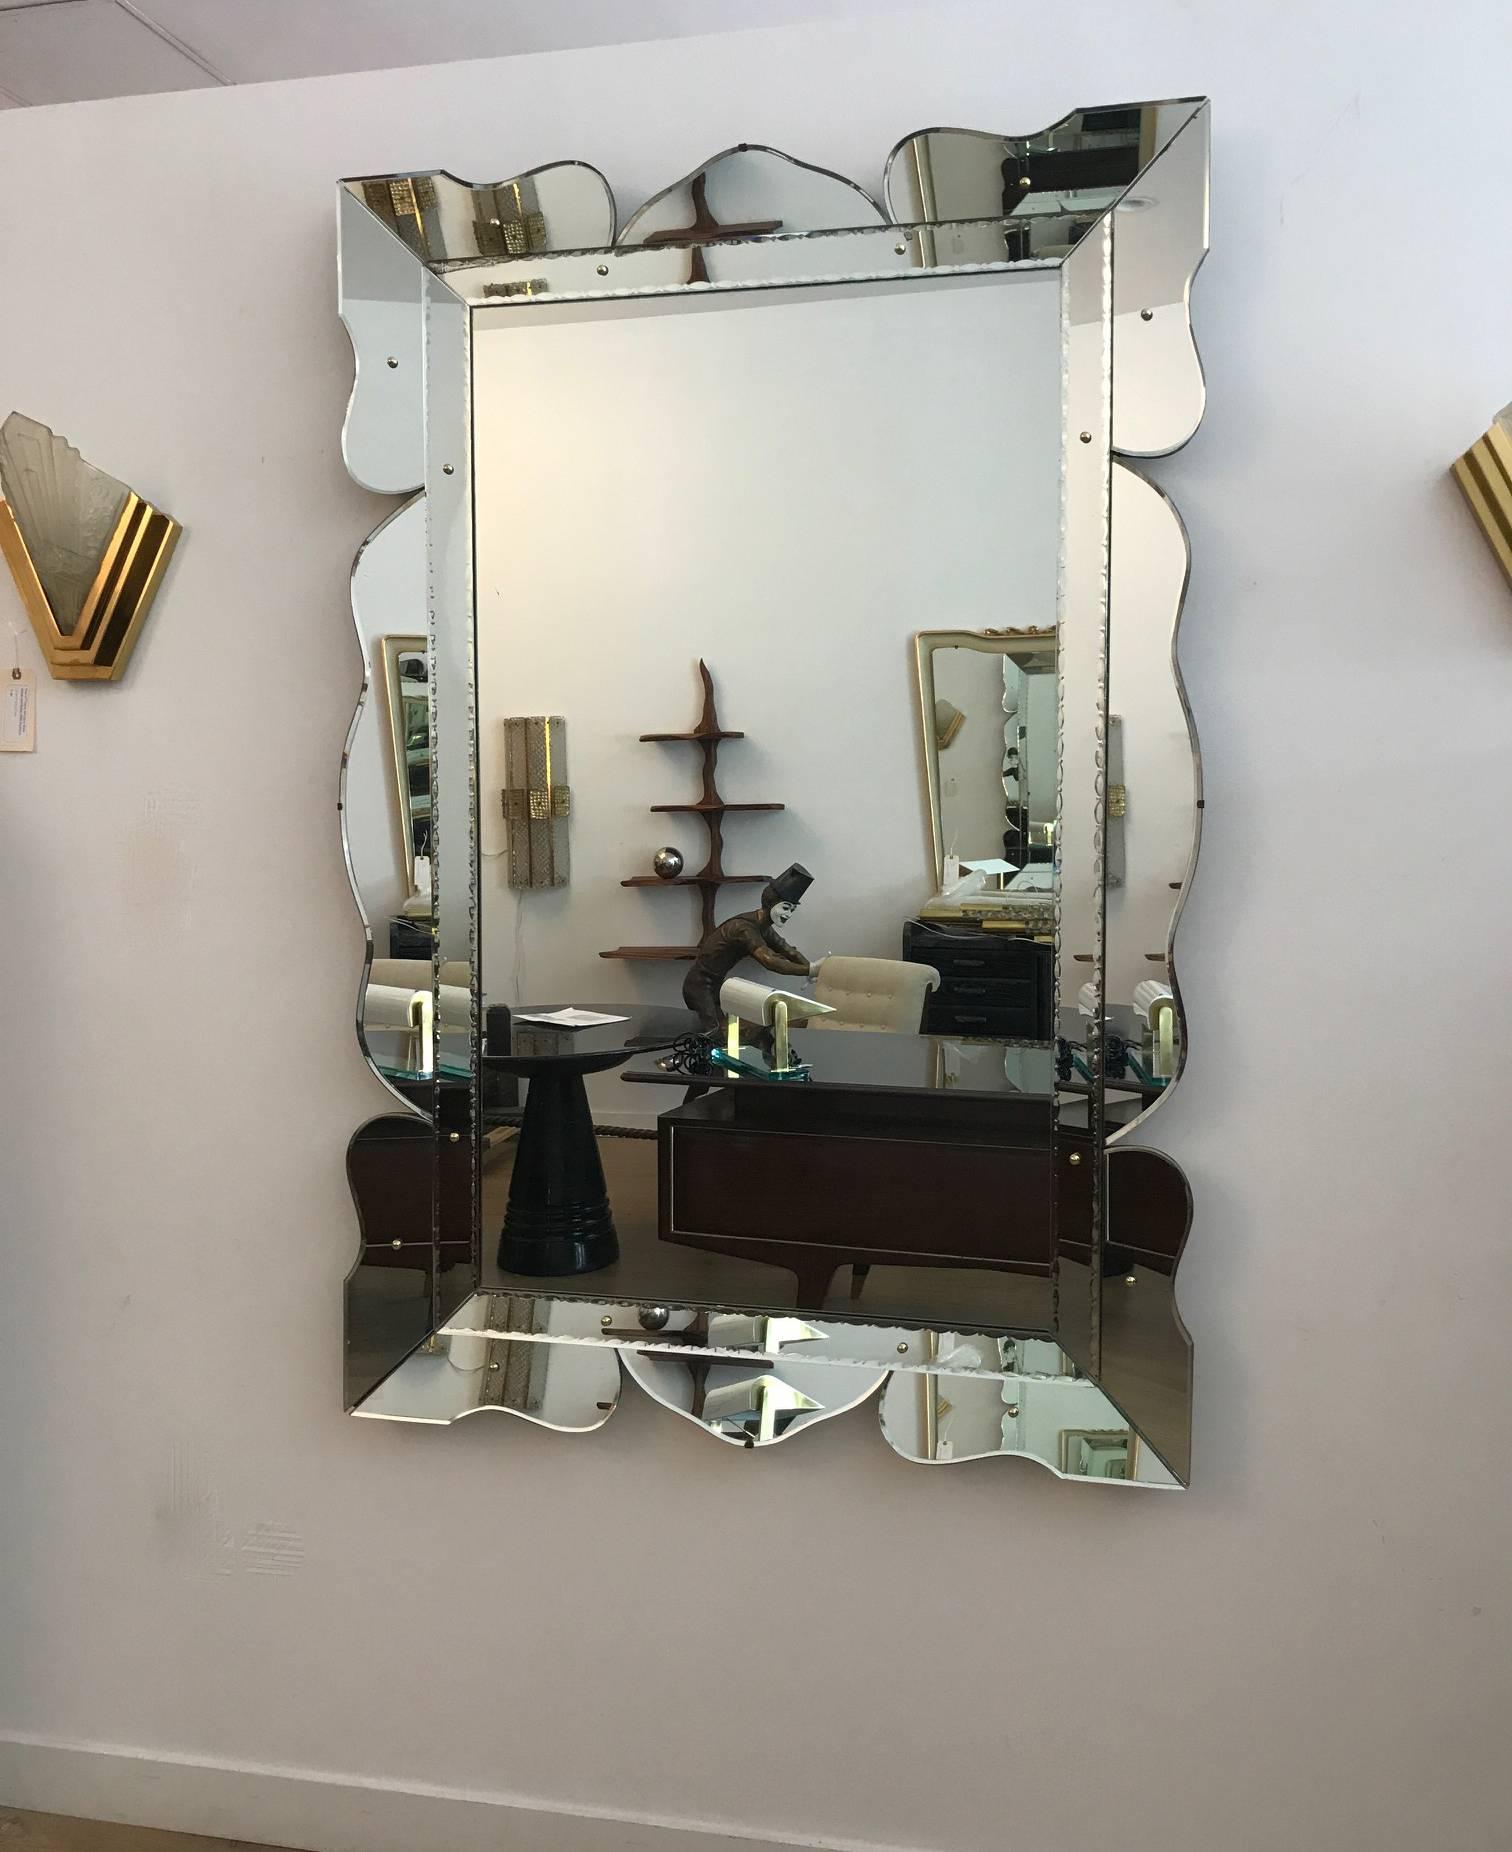 monumental vintage Hollywood regency style scalloped mirror circa 1950.The frame consists of scalloped beveled mirror panels with brass cap accents. We are showing this mirror in a portrait format but can be hung horizontally. 


